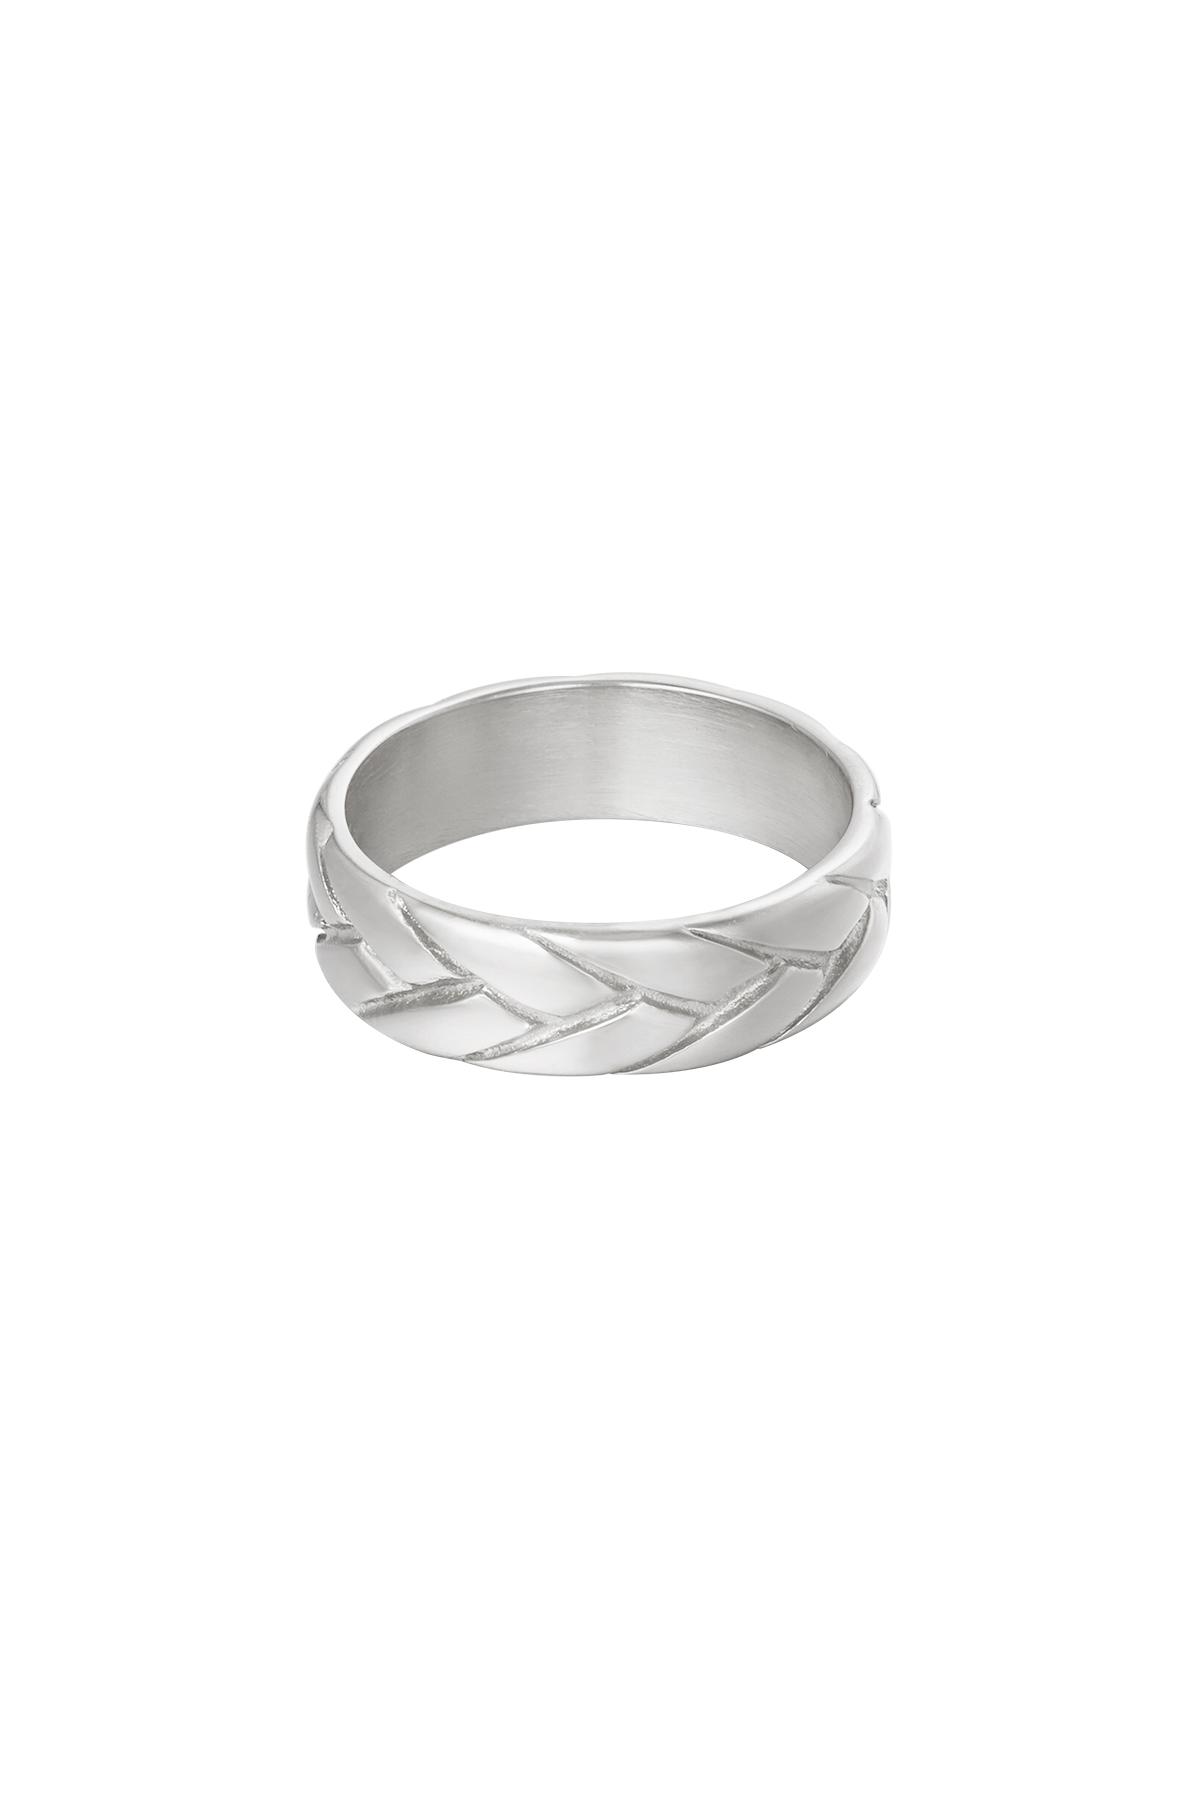 Ring Big Braid Silver Stainless Steel 16